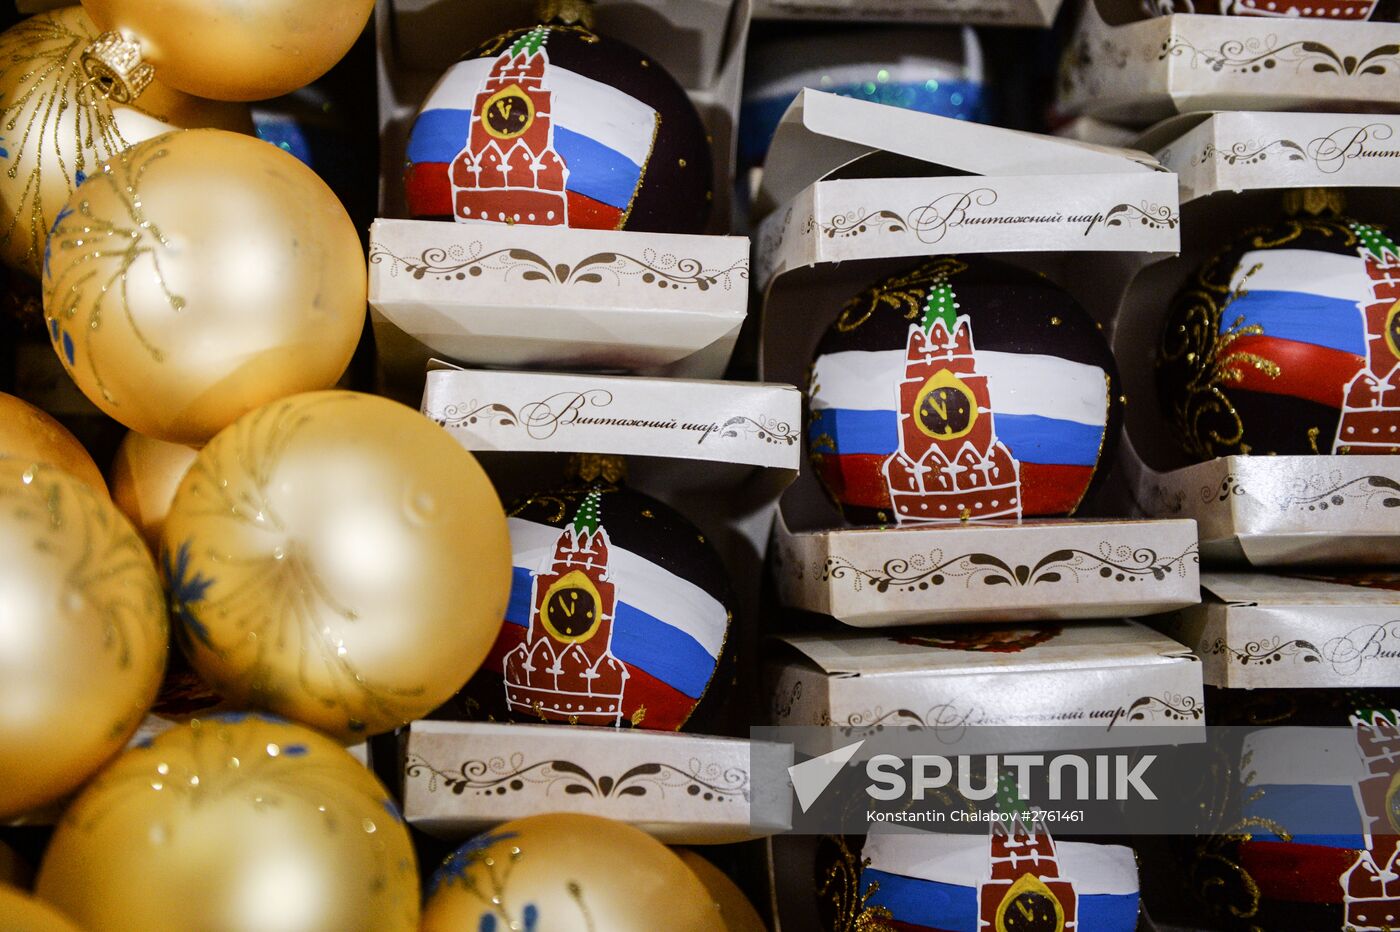 New Year tree decorations manufactured by Step by Step Plant in Novgorod Region